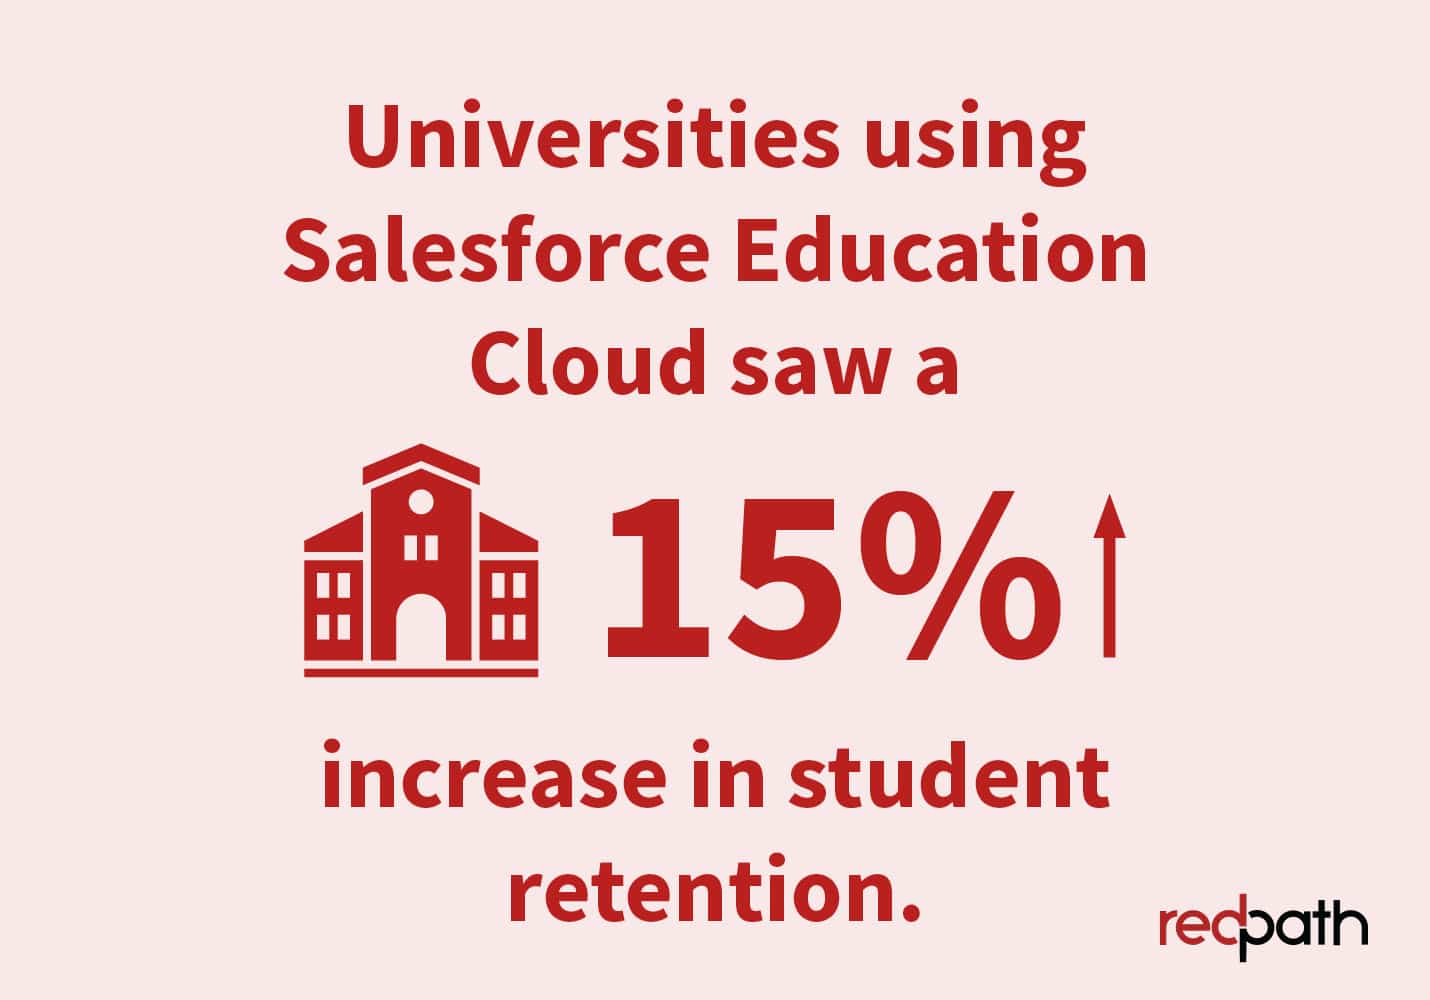 This graphic emphasizes the impact of Salesforce Education Cloud on universities, which can see a 15% increase in student retention.